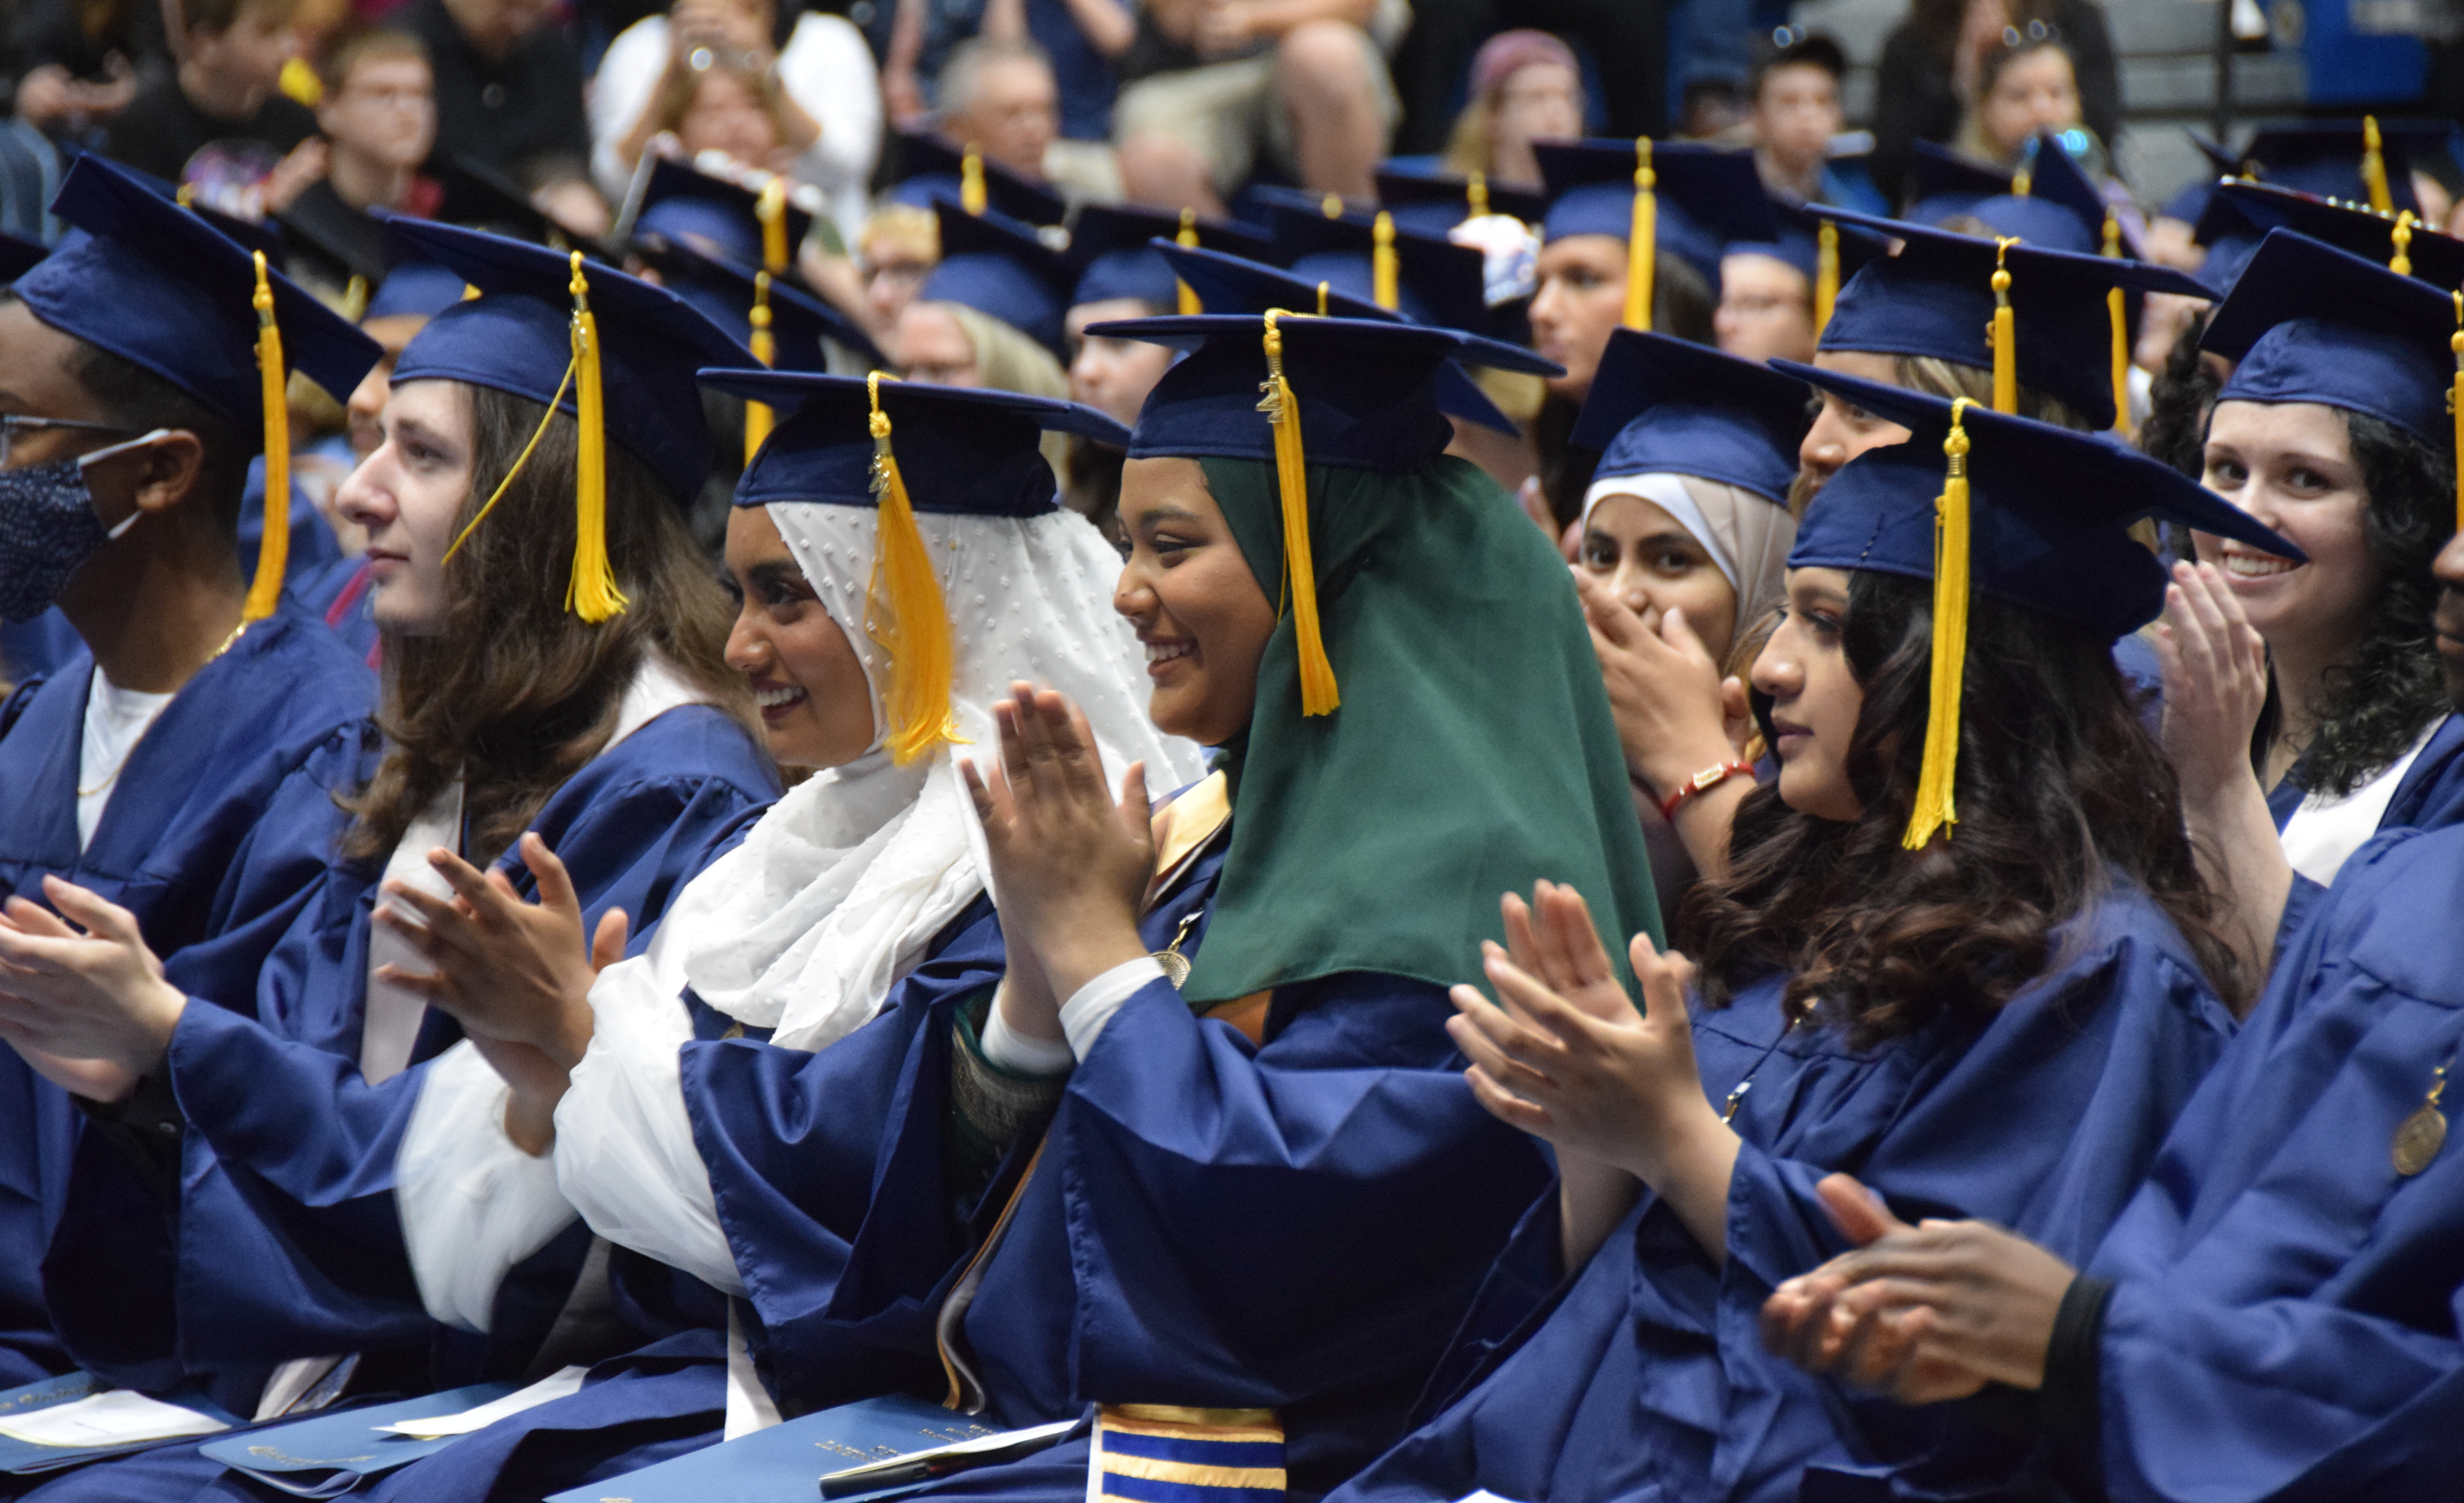 VU Graduates wearing caps and gowns applaud during 2022 Spring Commencement ceremony